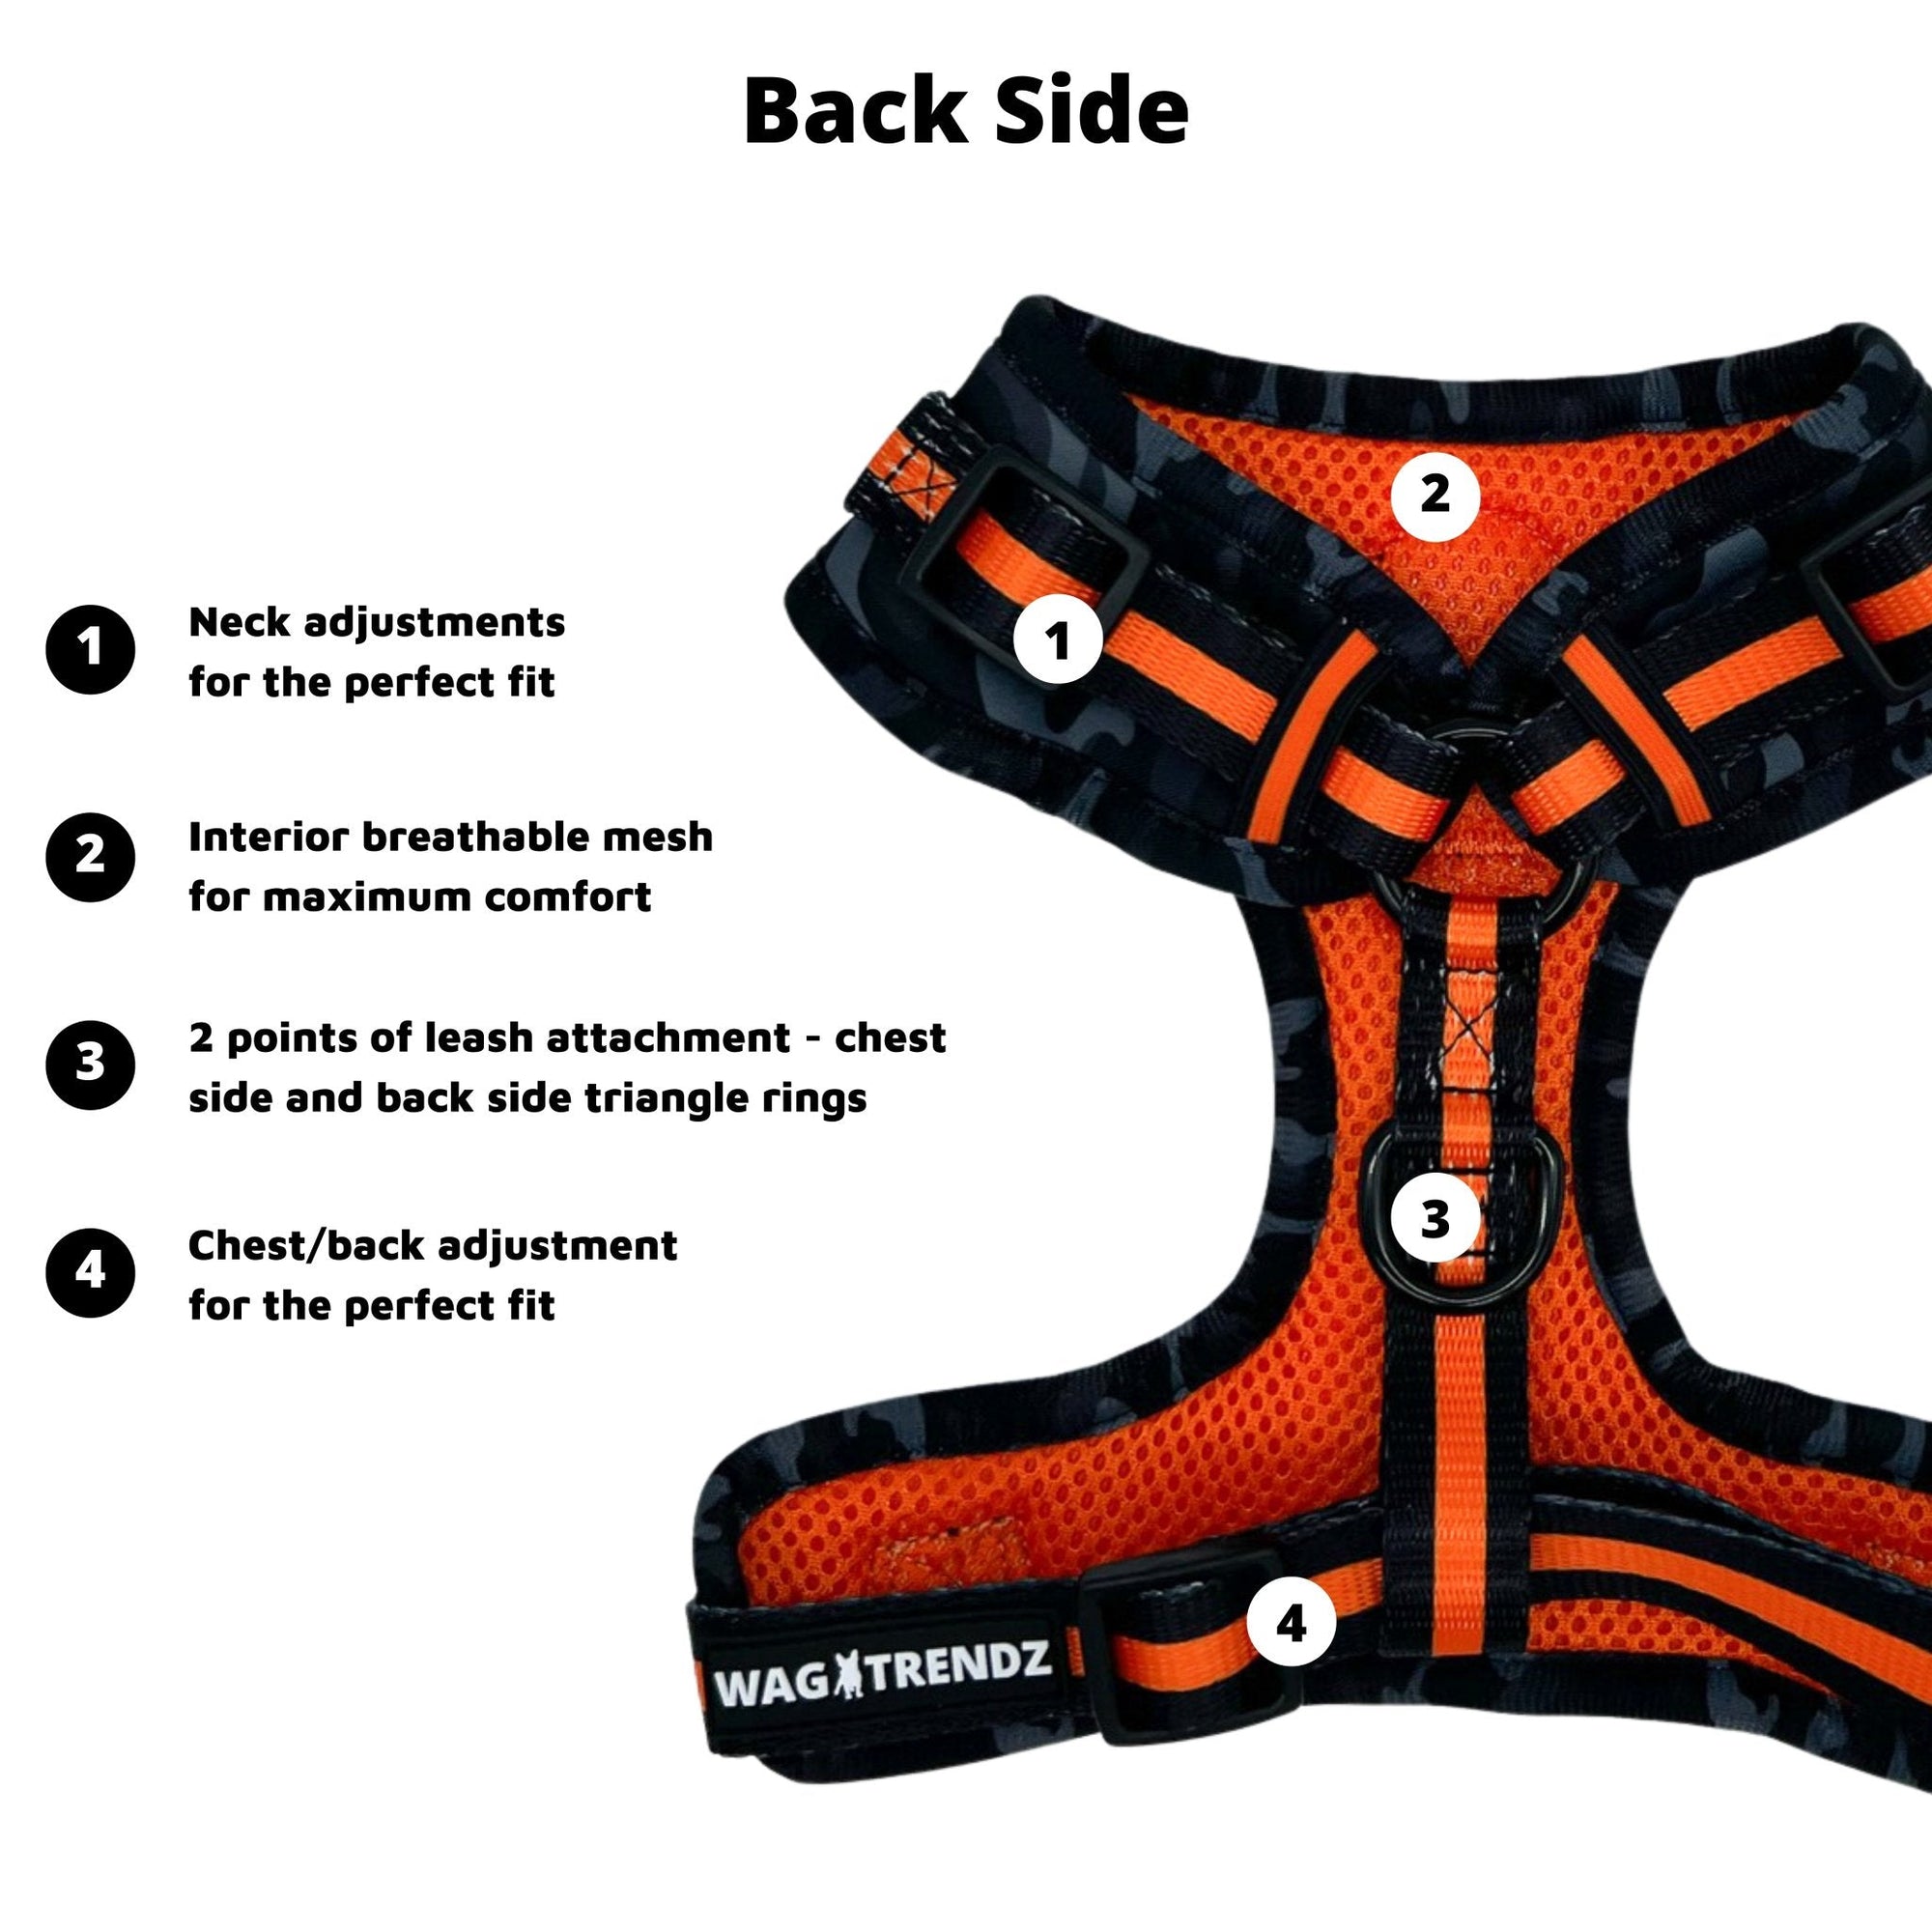 No Pull Dog Harness - black and gray camo with orange accents - back side view with product feature captions - against solid white background - Wag Trendz